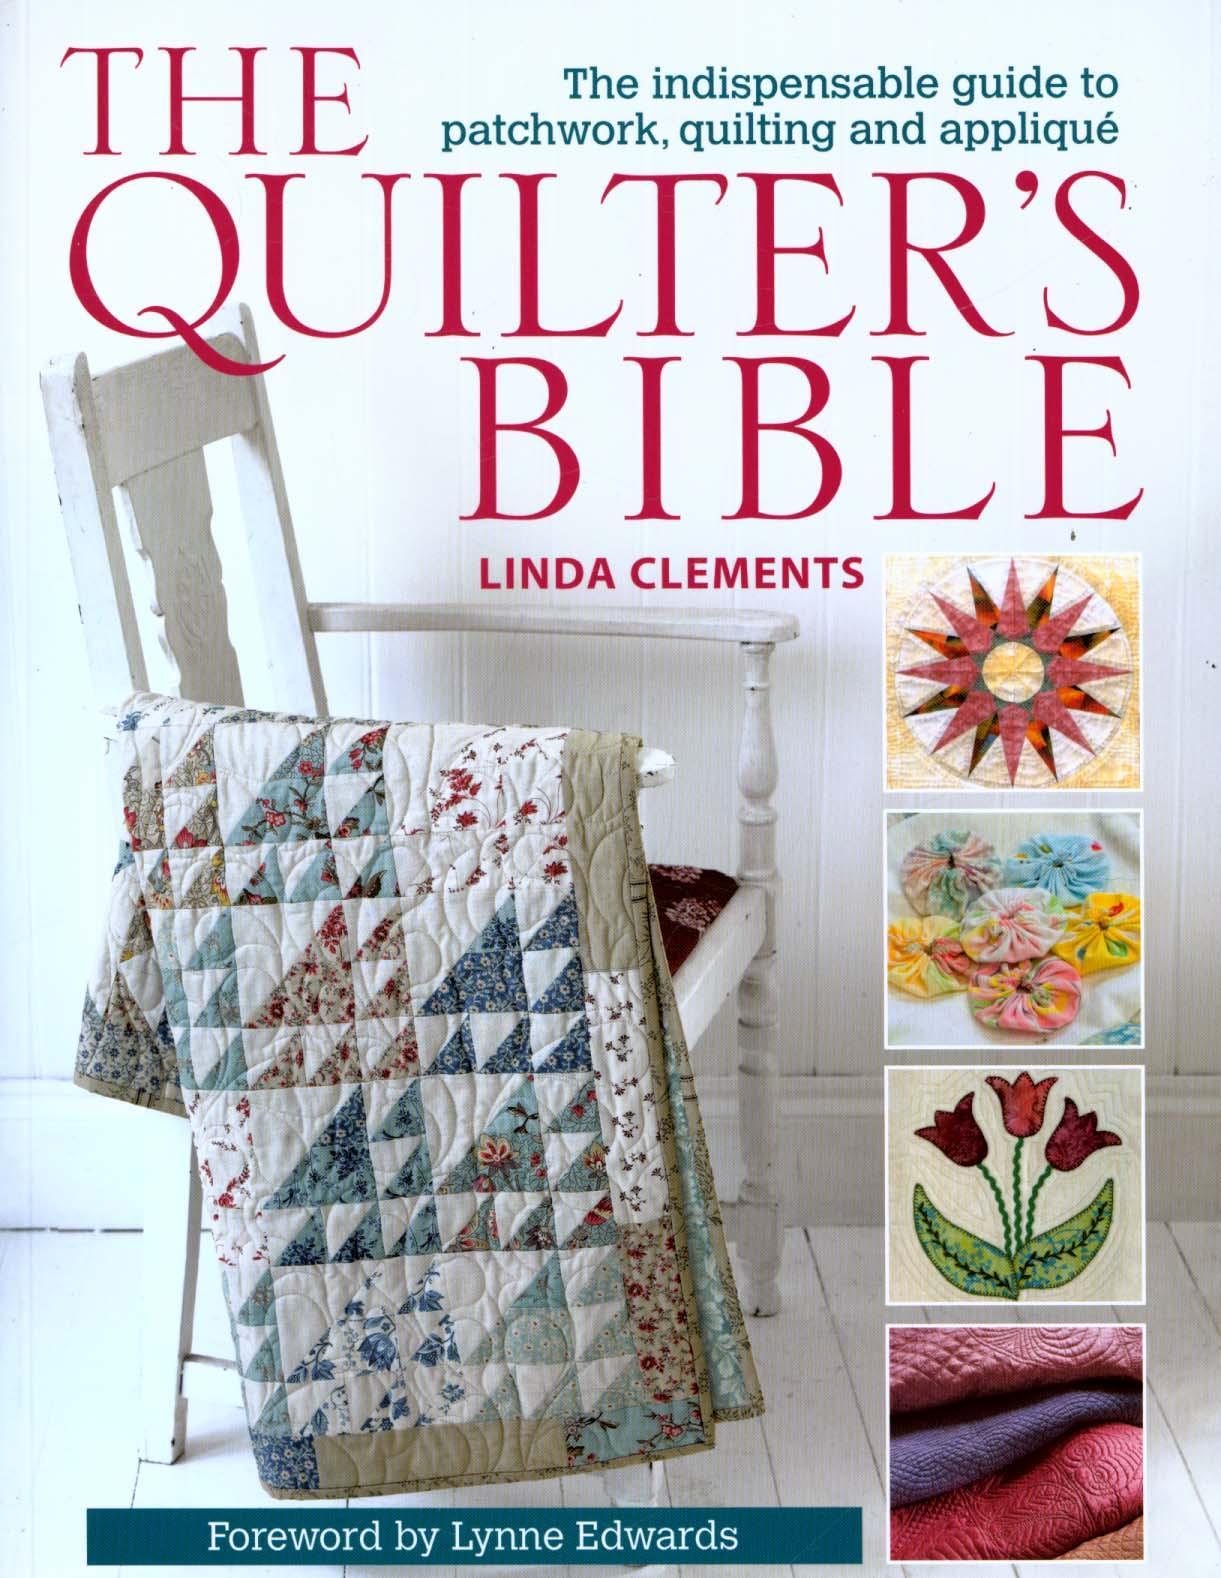 Quilter's Bible - Linda Clements